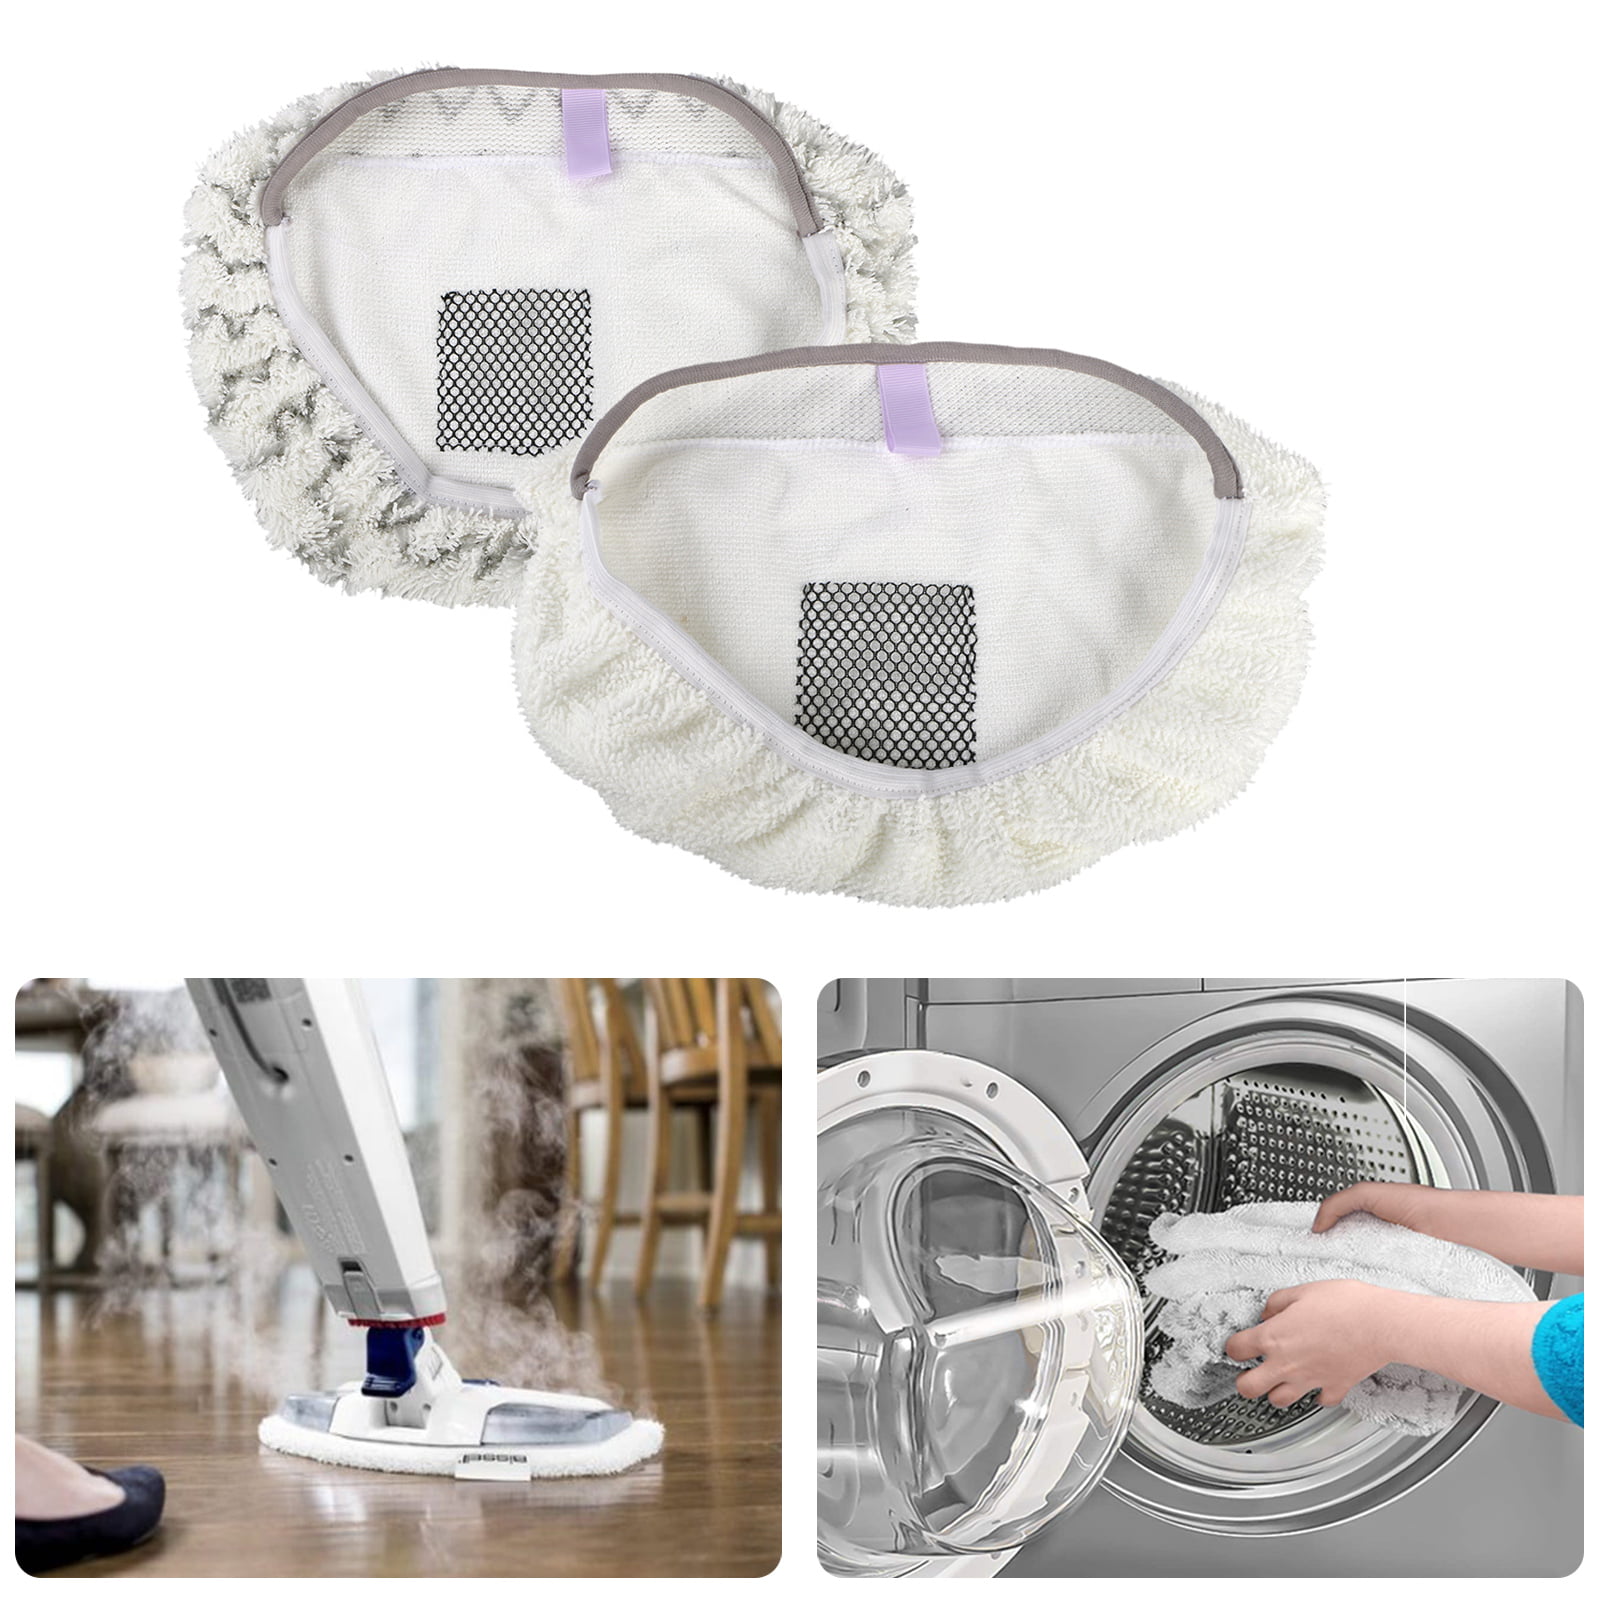 2 Coral 2 Micro Compatible Steam Mop Pads Hoover Steamjet SSNC1700 SSNBA1700 